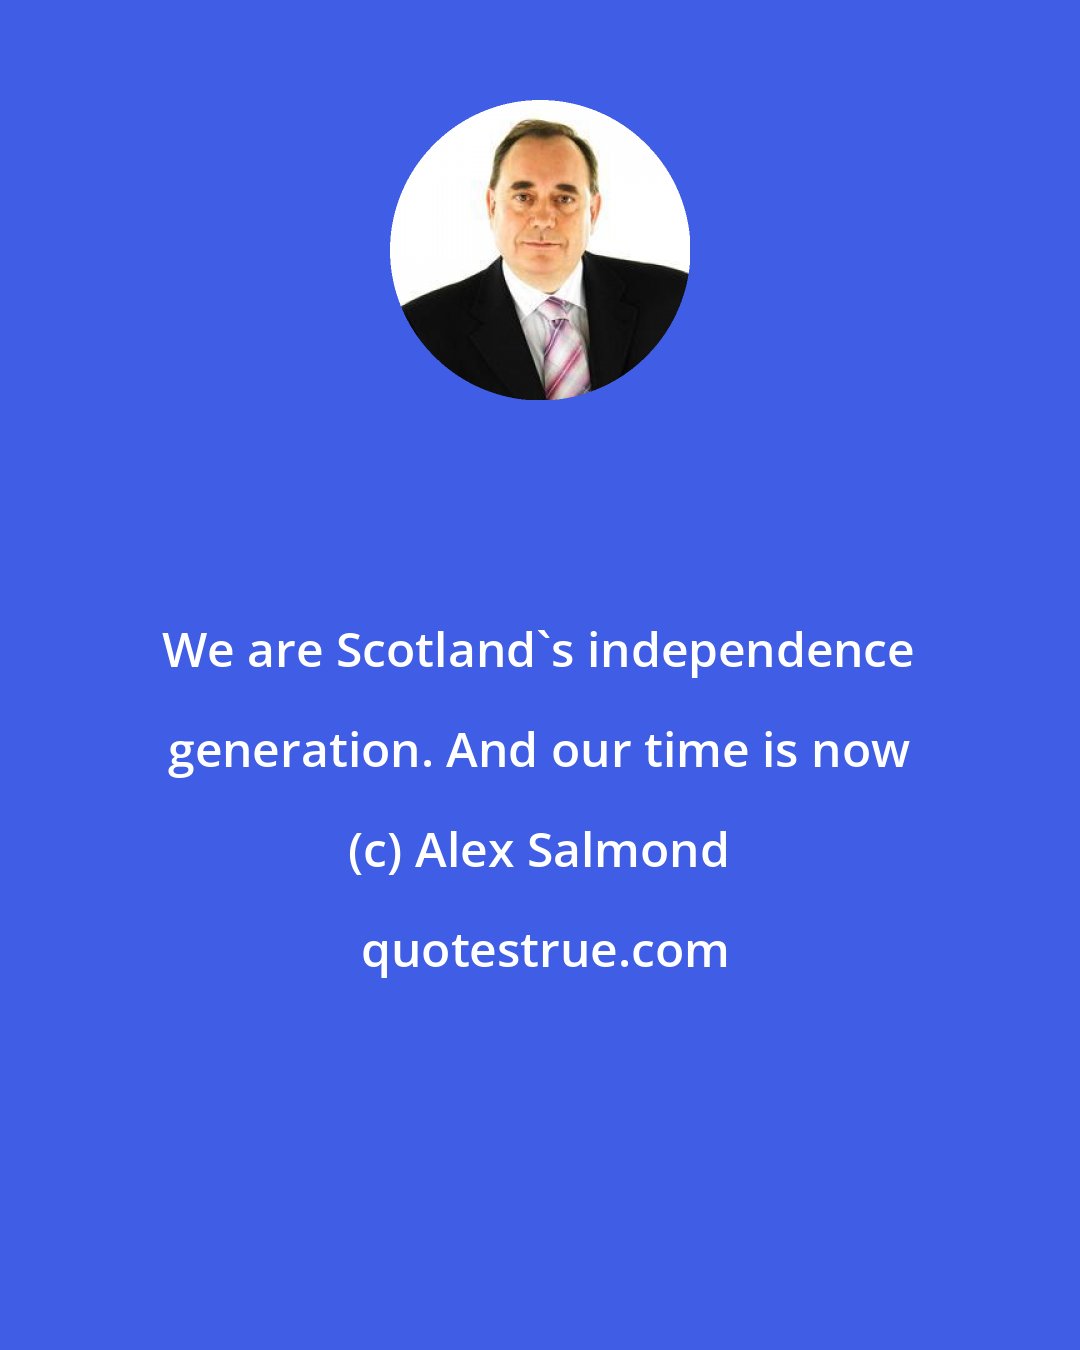 Alex Salmond: We are Scotland's independence generation. And our time is now